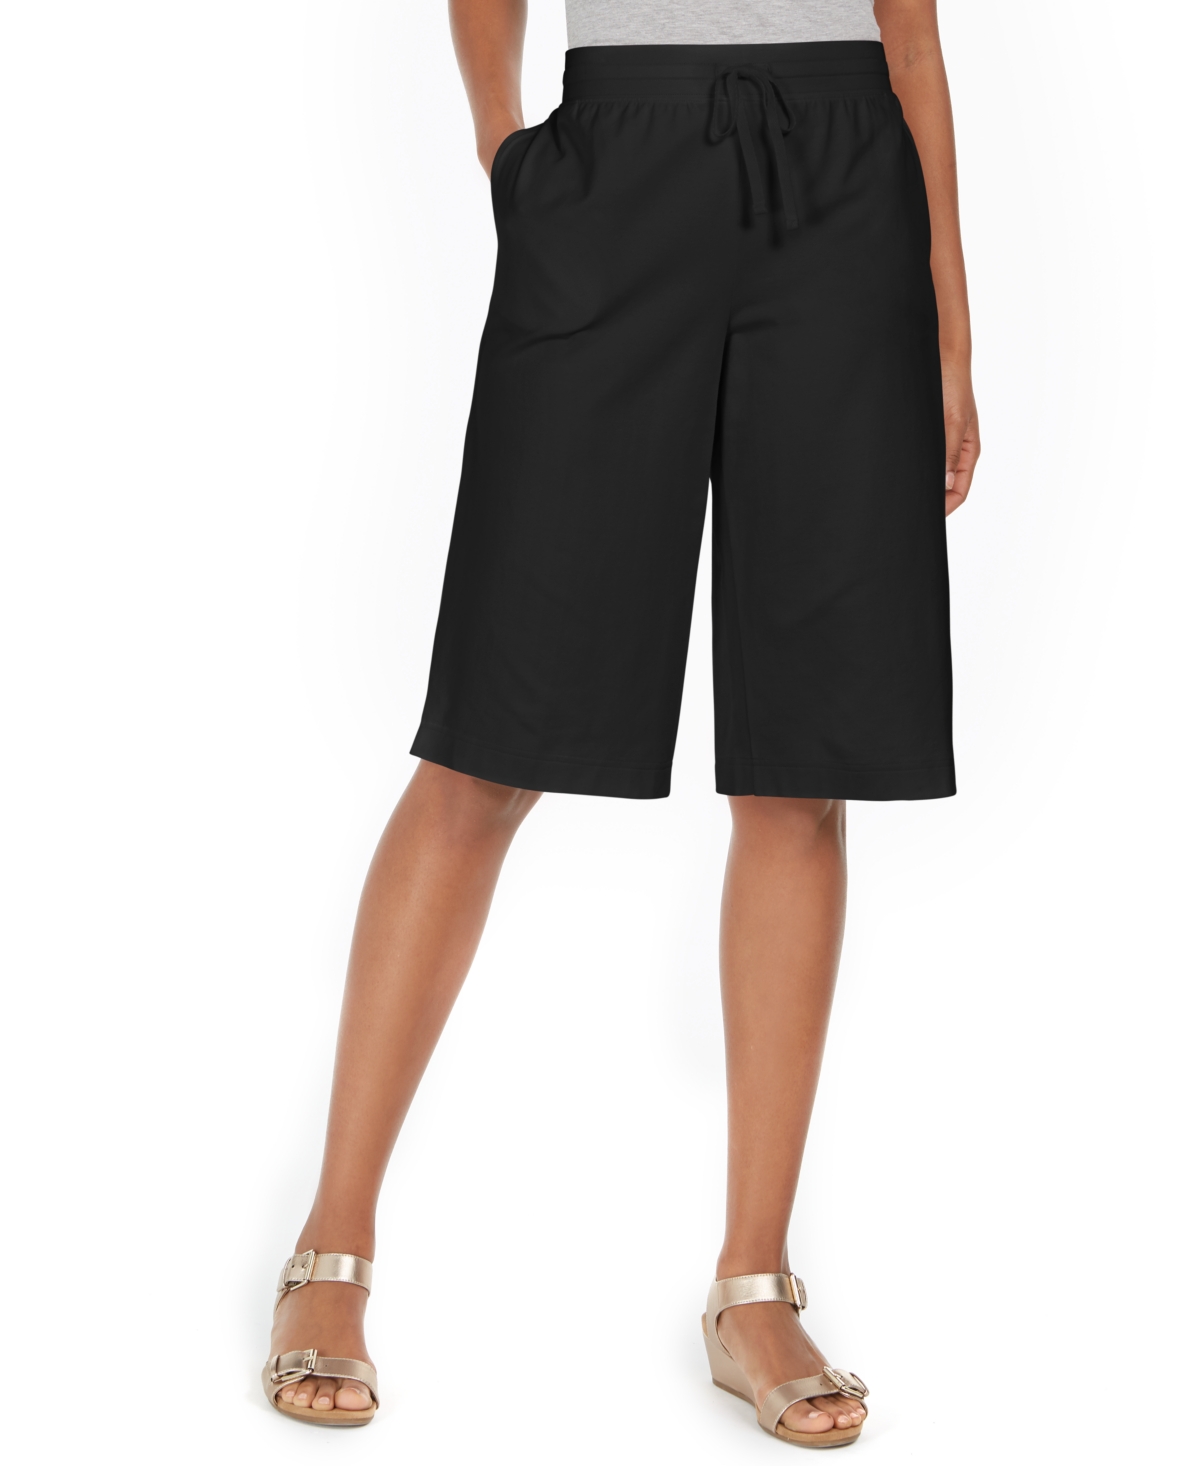 Petite Knit Skimmer Shorts, Created for Macy's - Deep Black